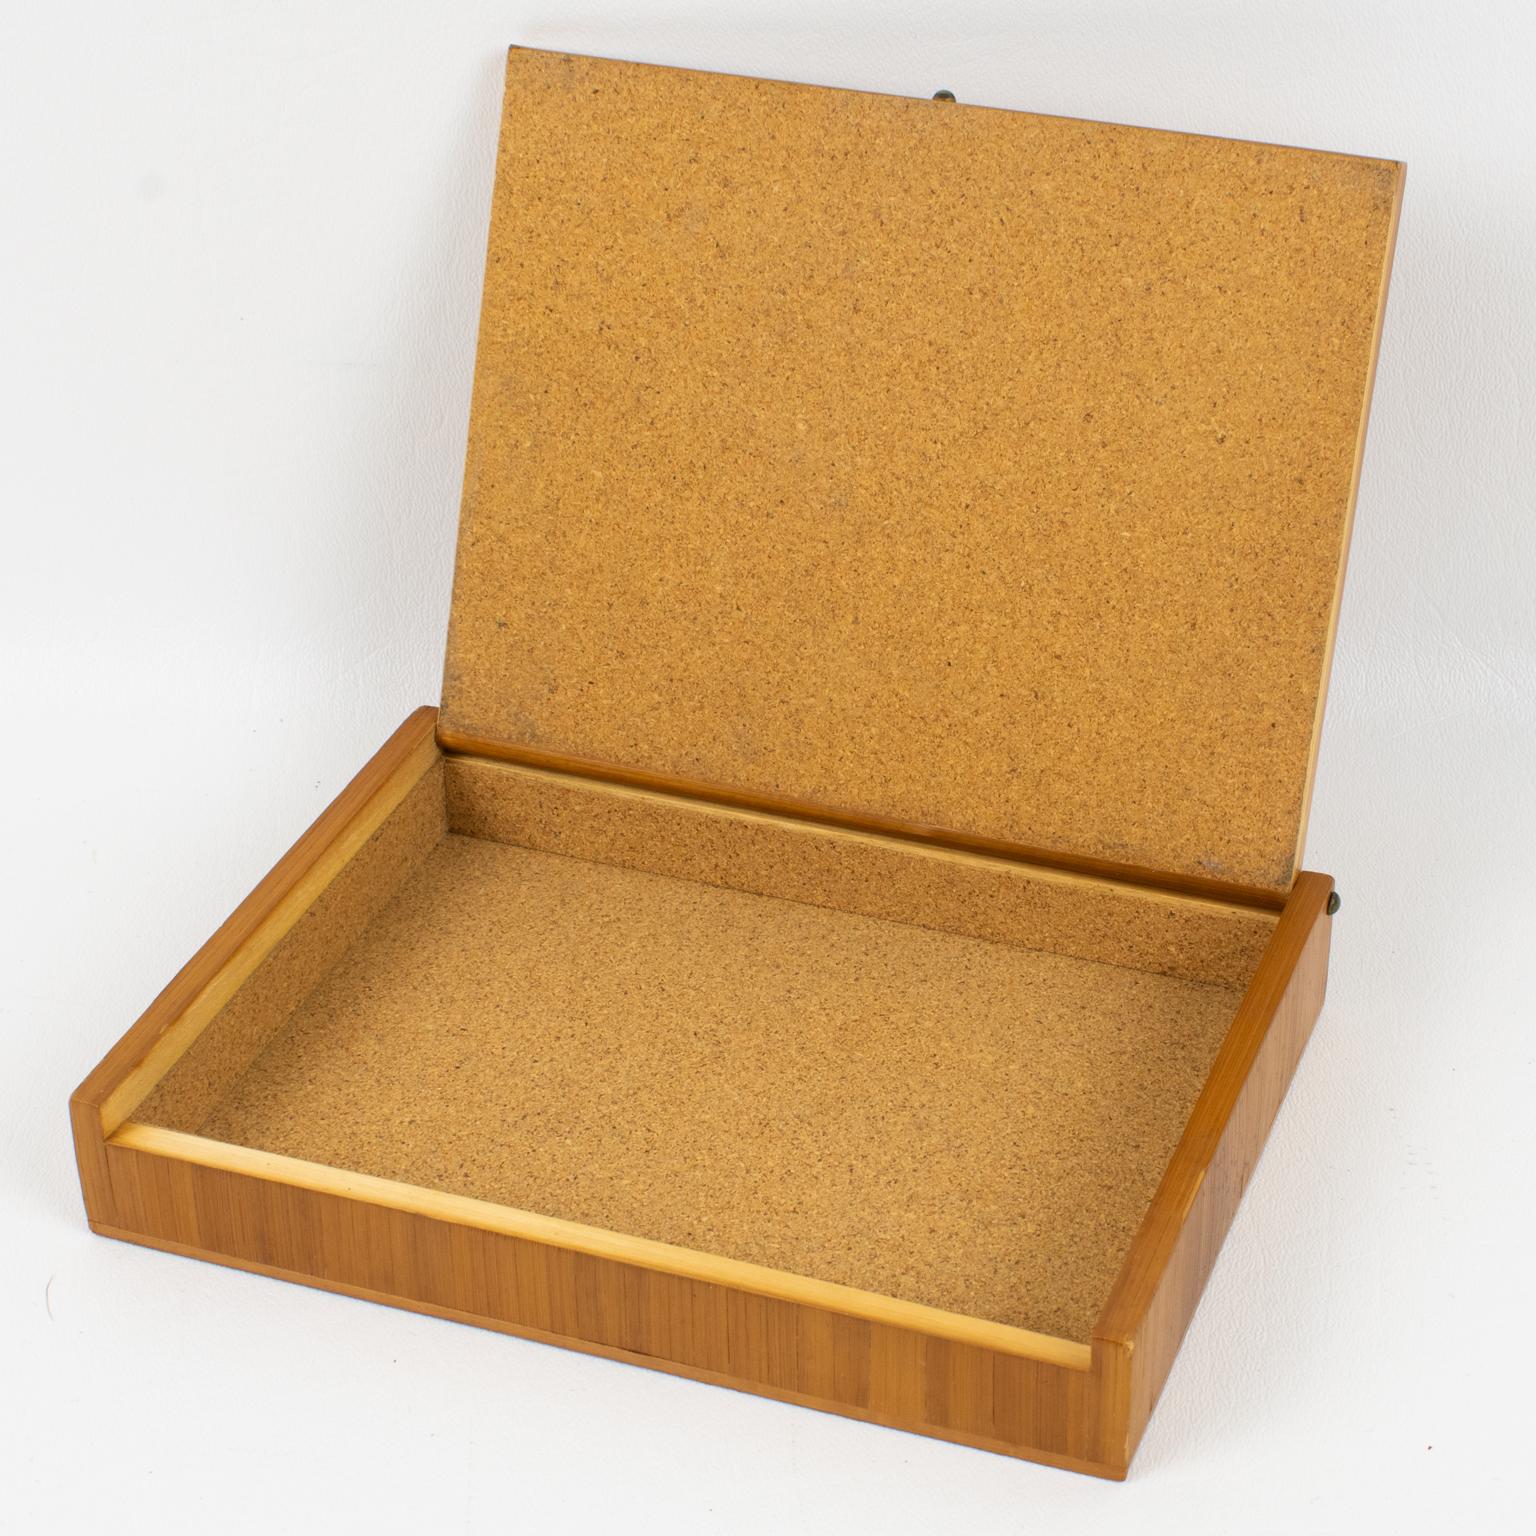 Mid-20th Century Decorative Straw Marquetry Box, France 1930s attributed to Jean Michel Frank For Sale